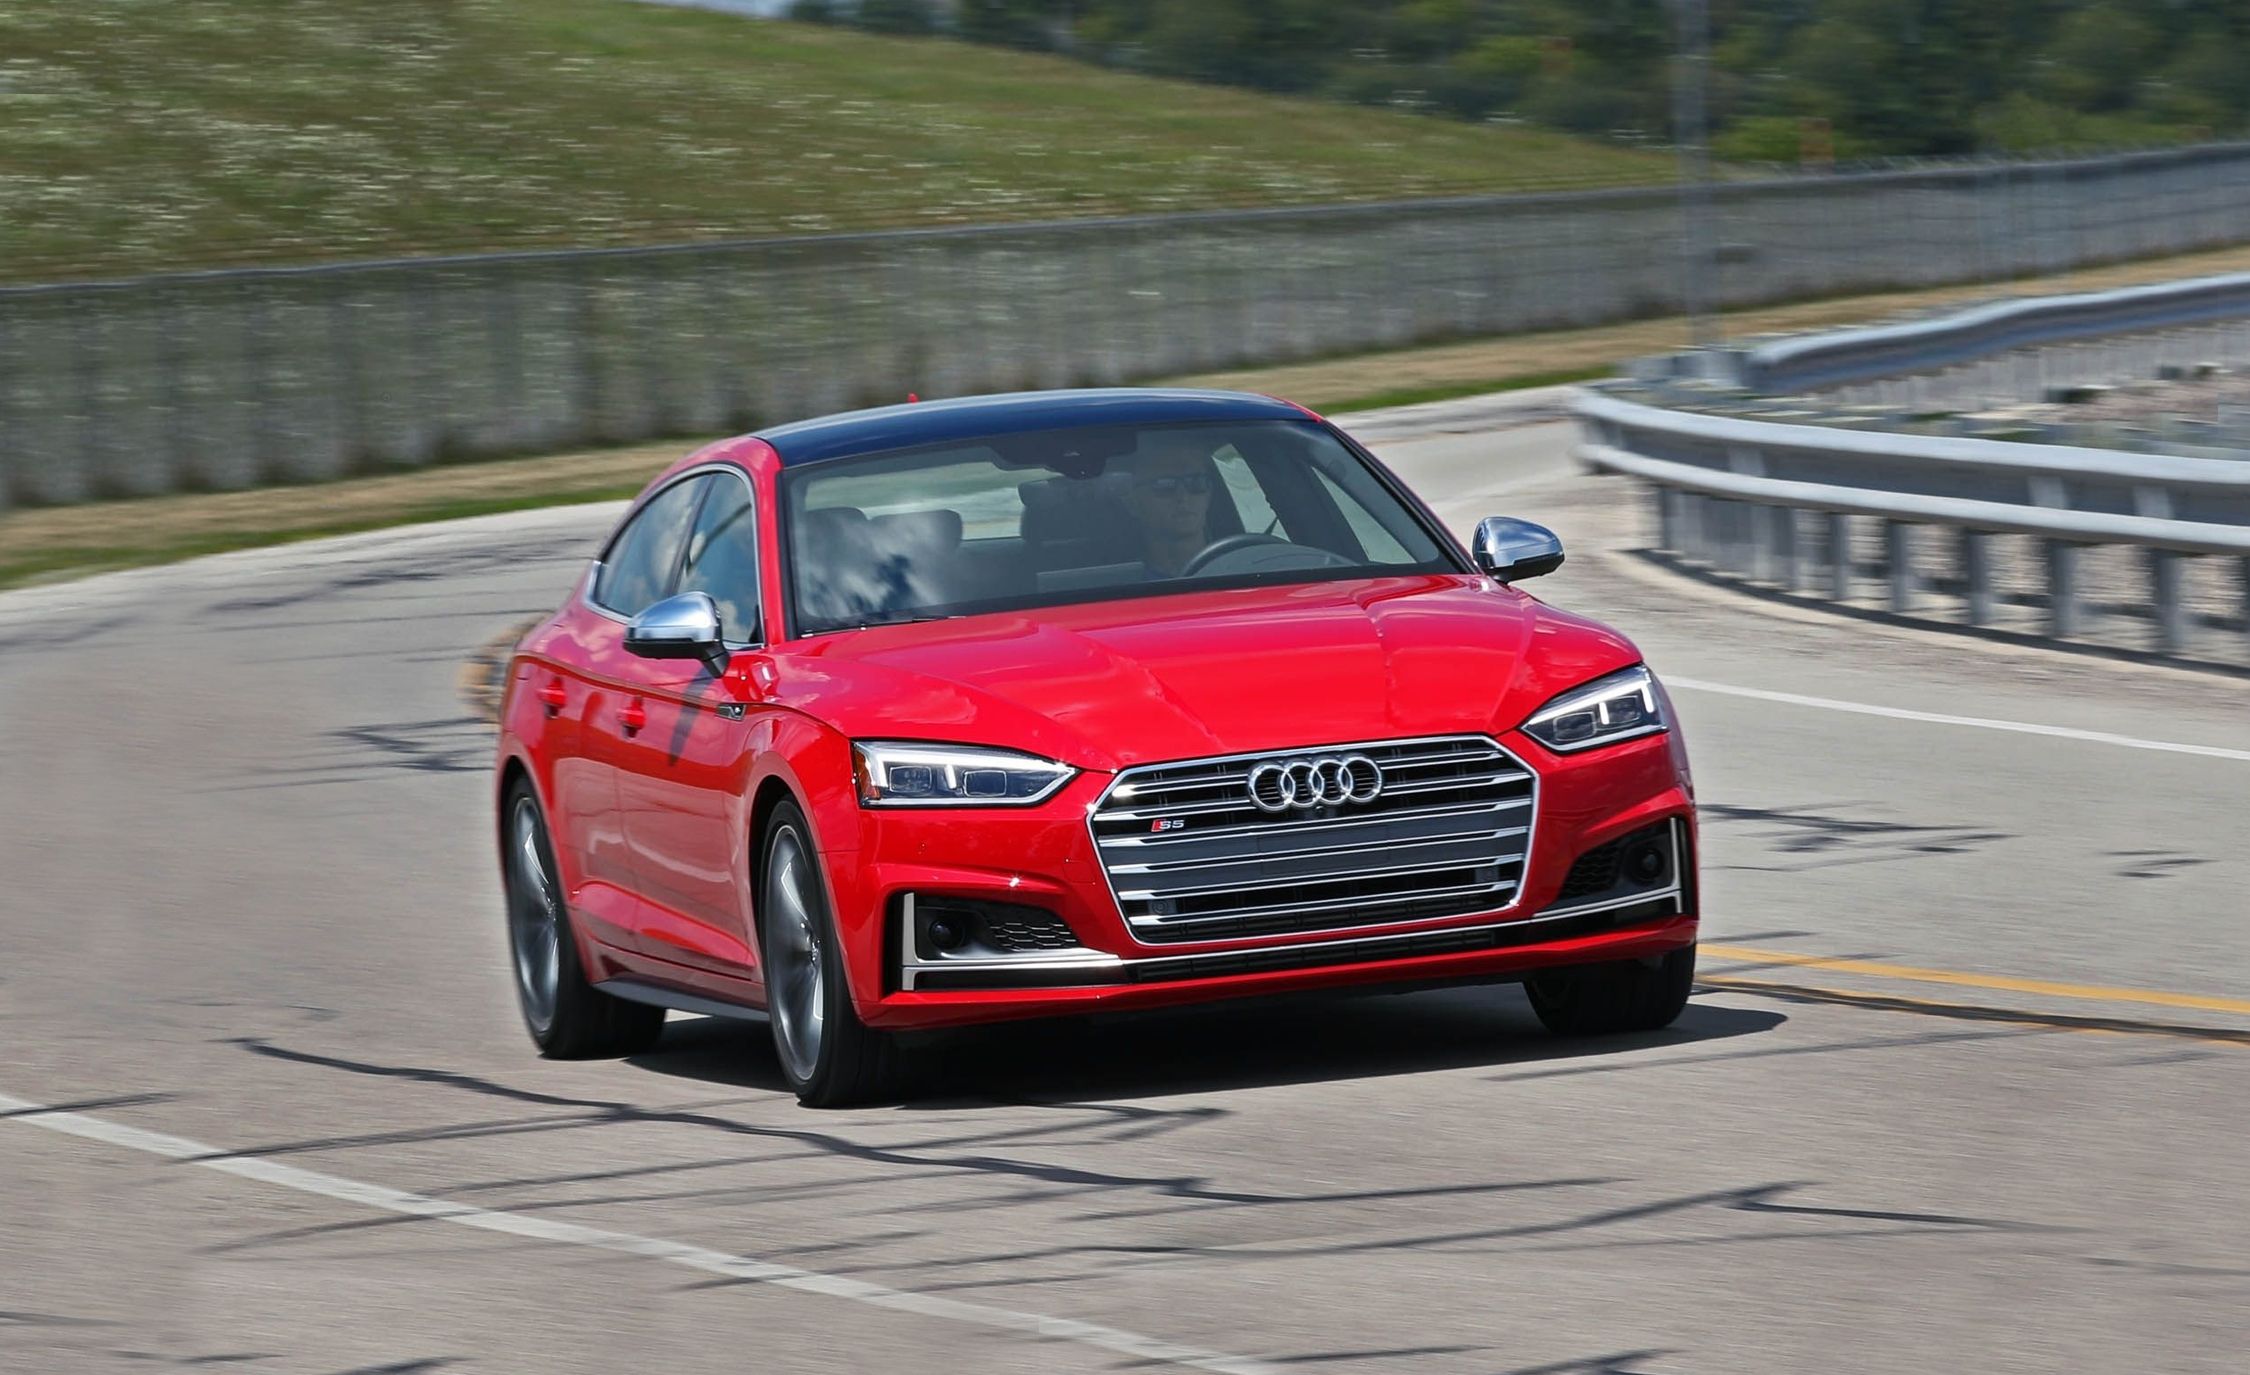 First Drive: 2018 Audi A5 and S5 Sportback